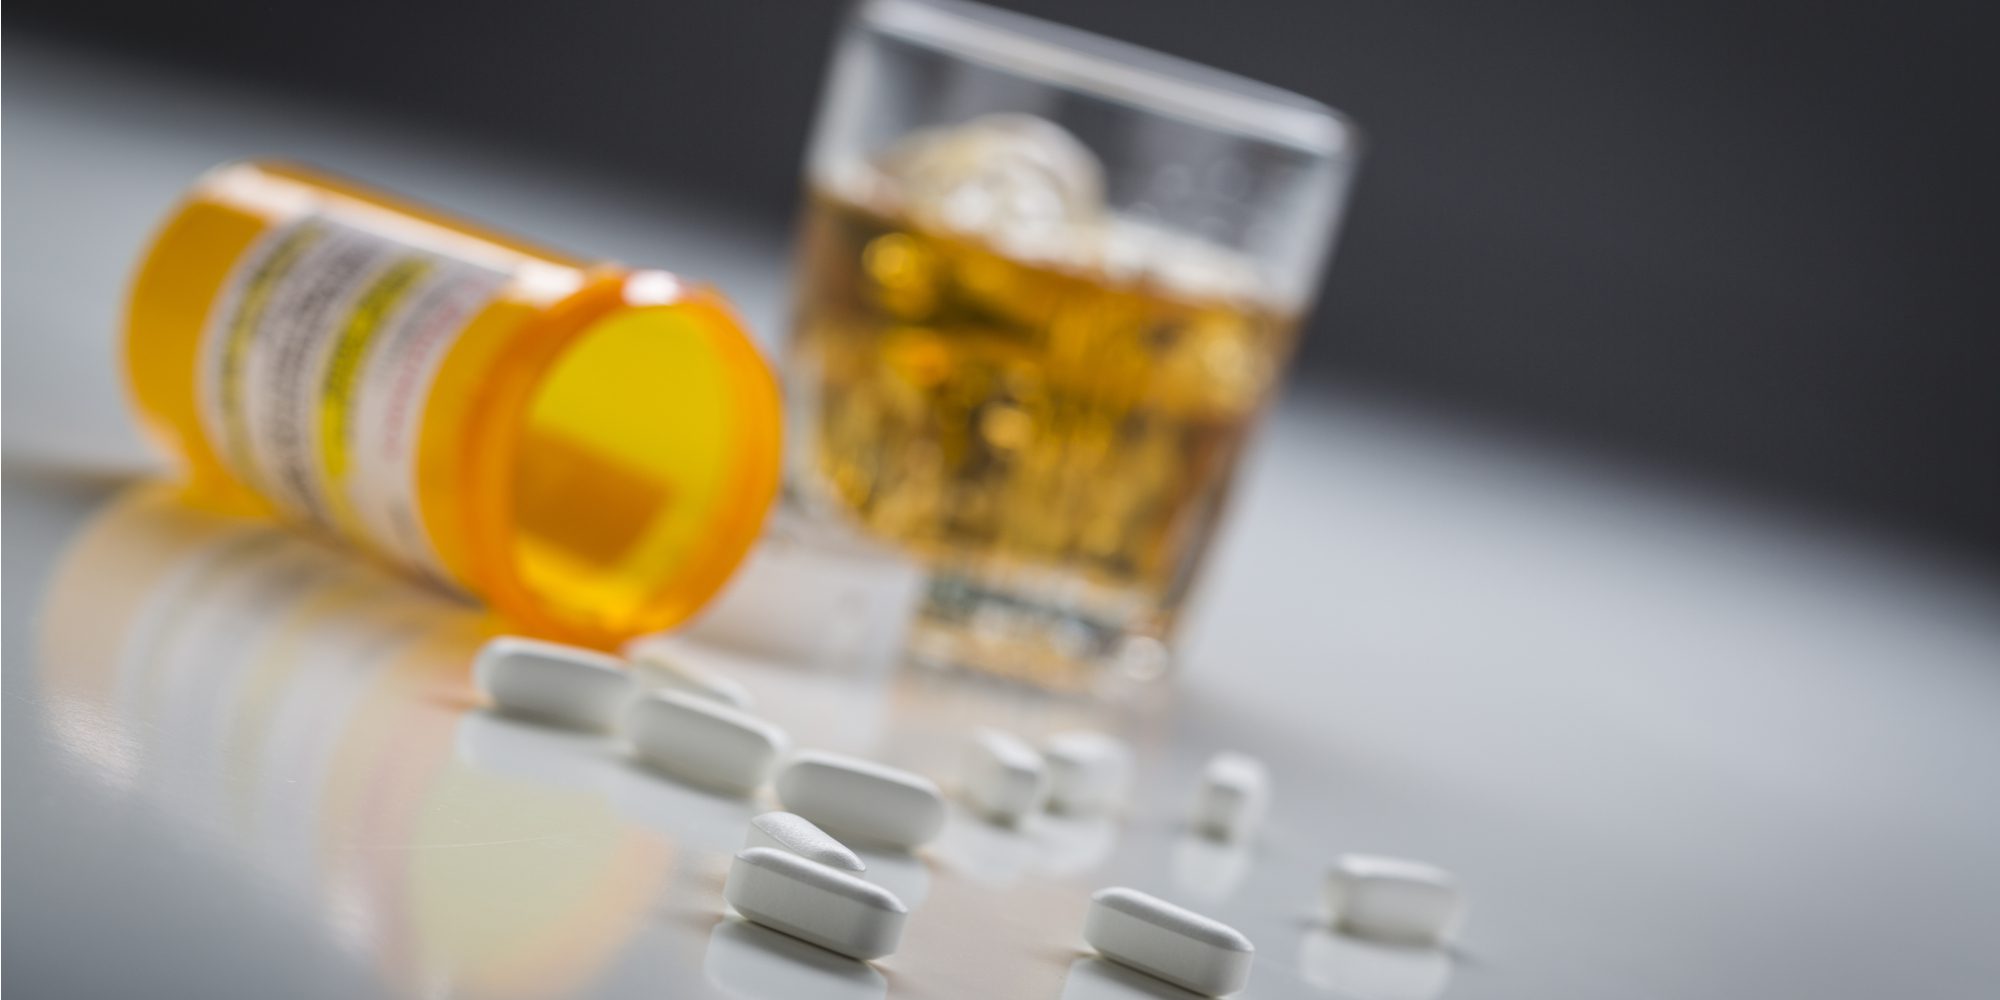 Ambien and Alcohol: A Dangerous Combination